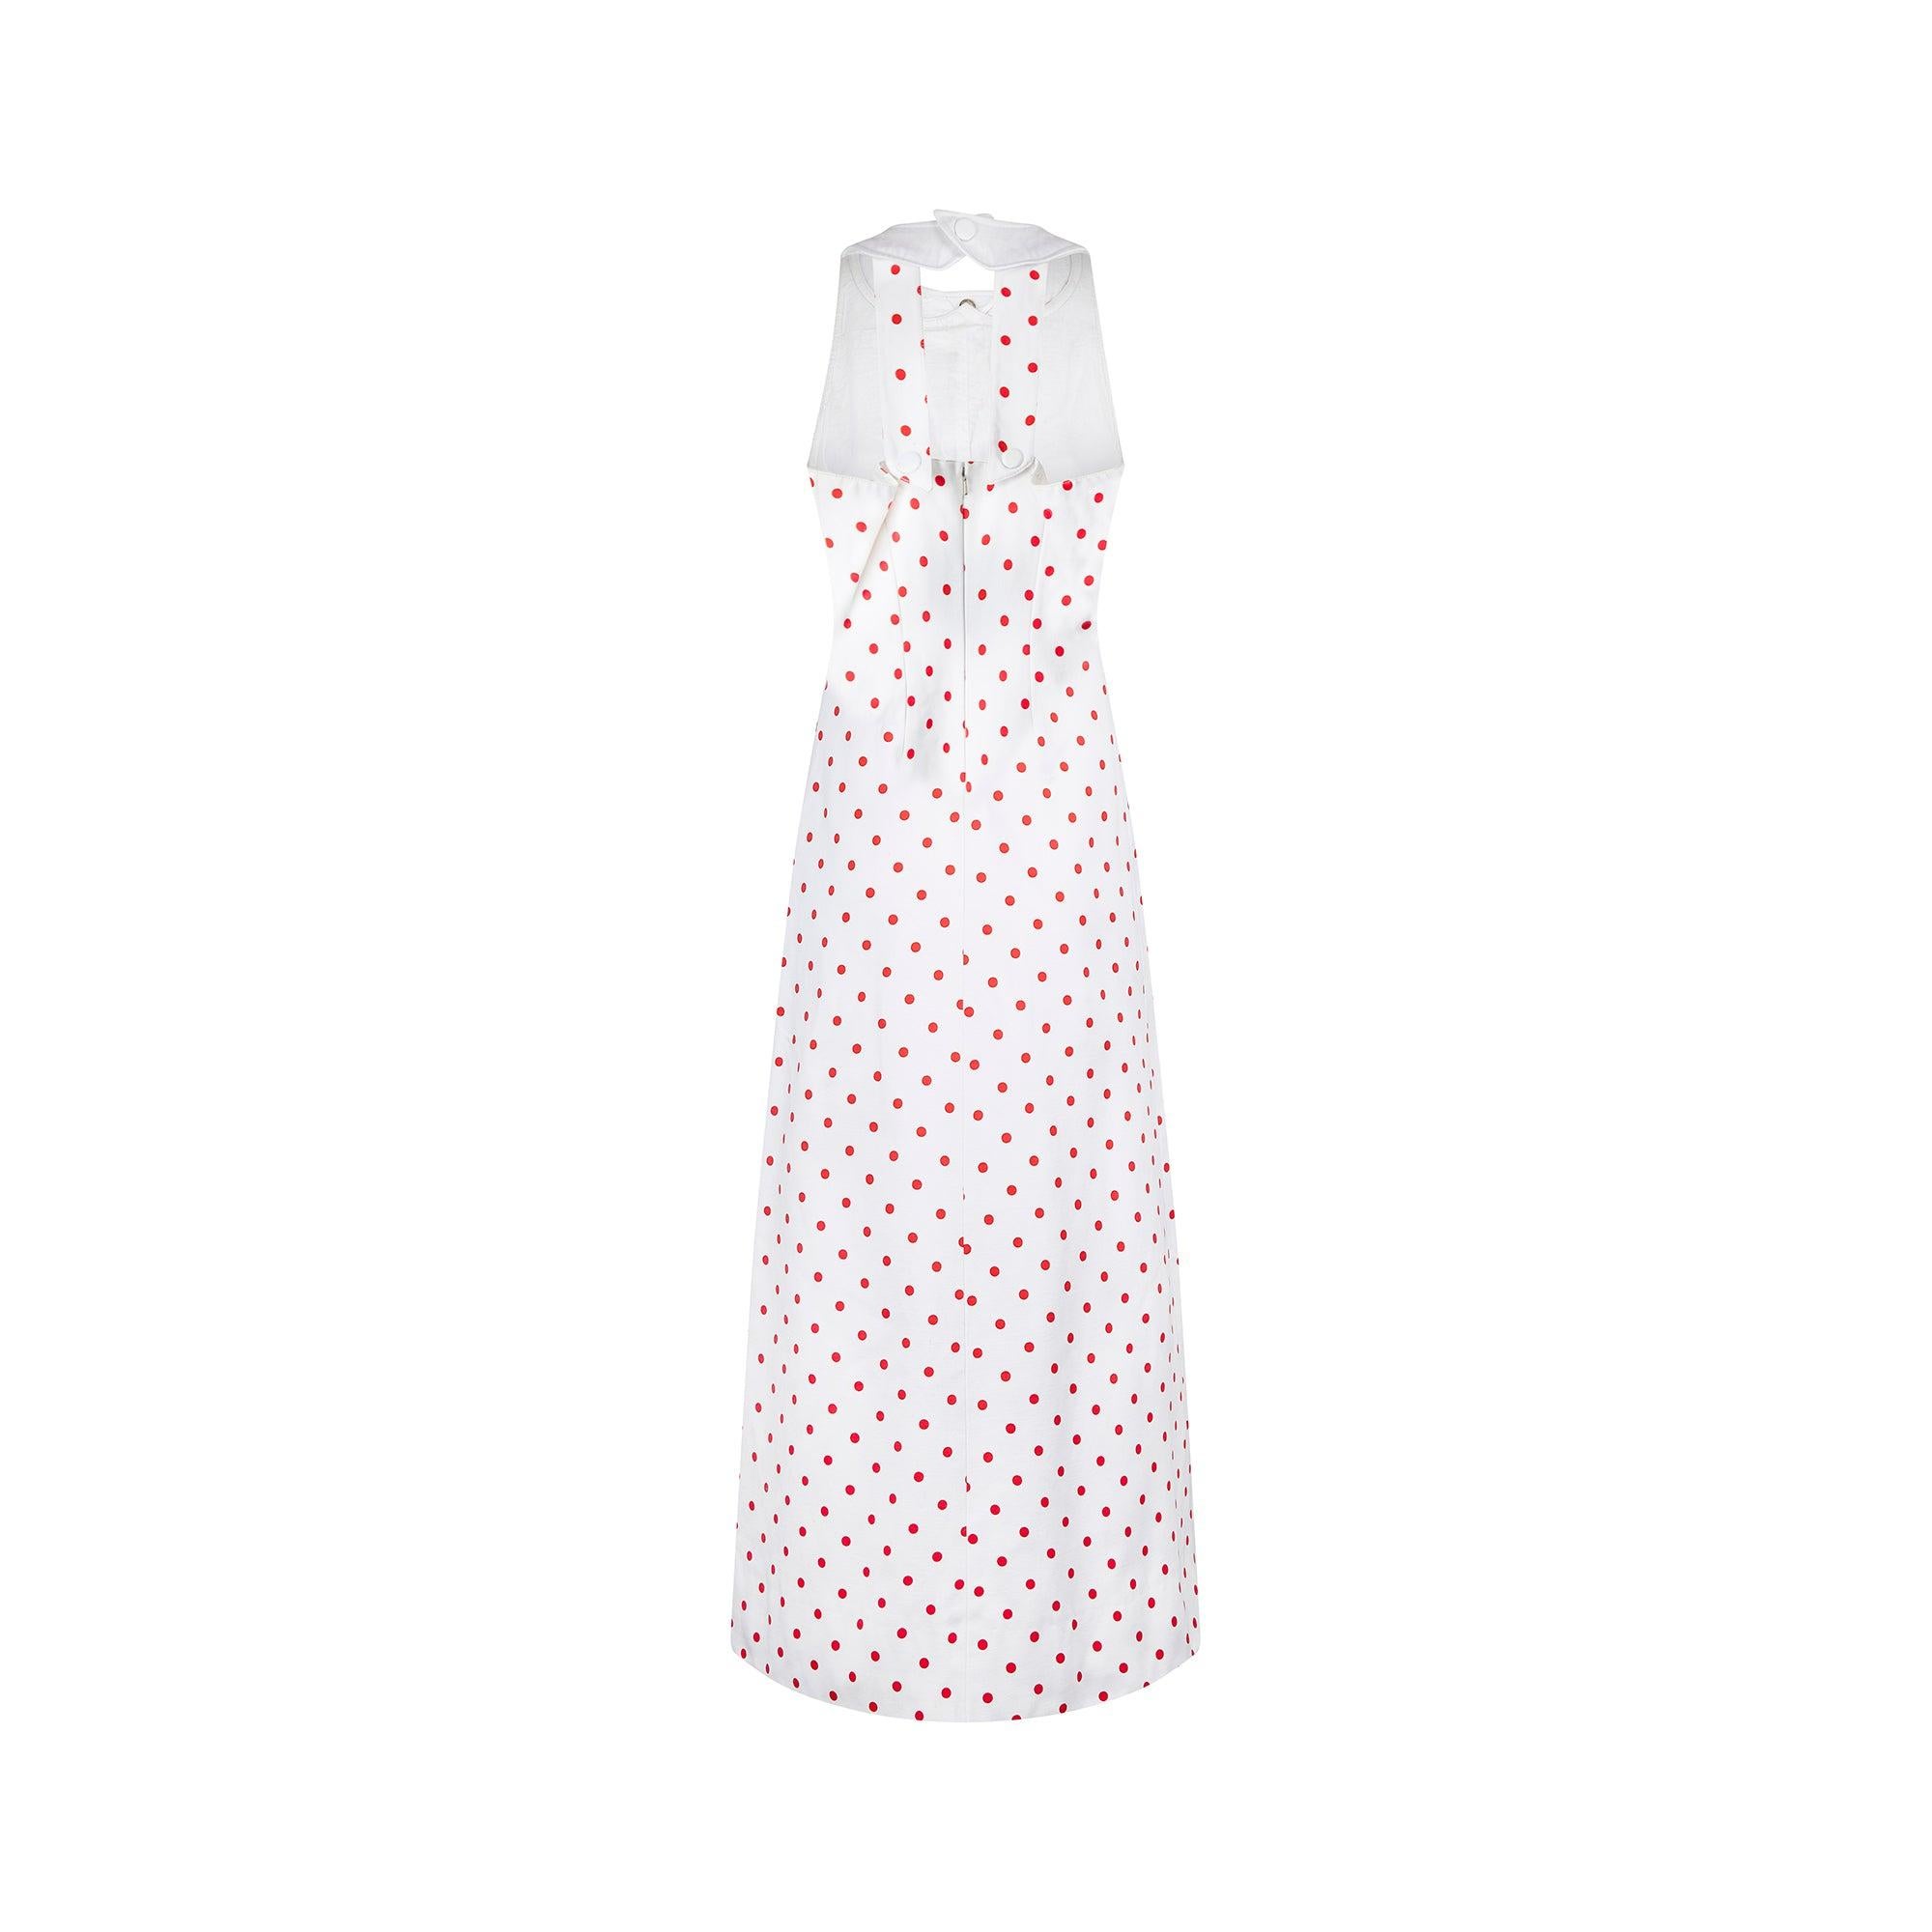 1970s André Courrèges Haute Couture Polka Dot Cotton Dress In Good Condition For Sale In London, GB